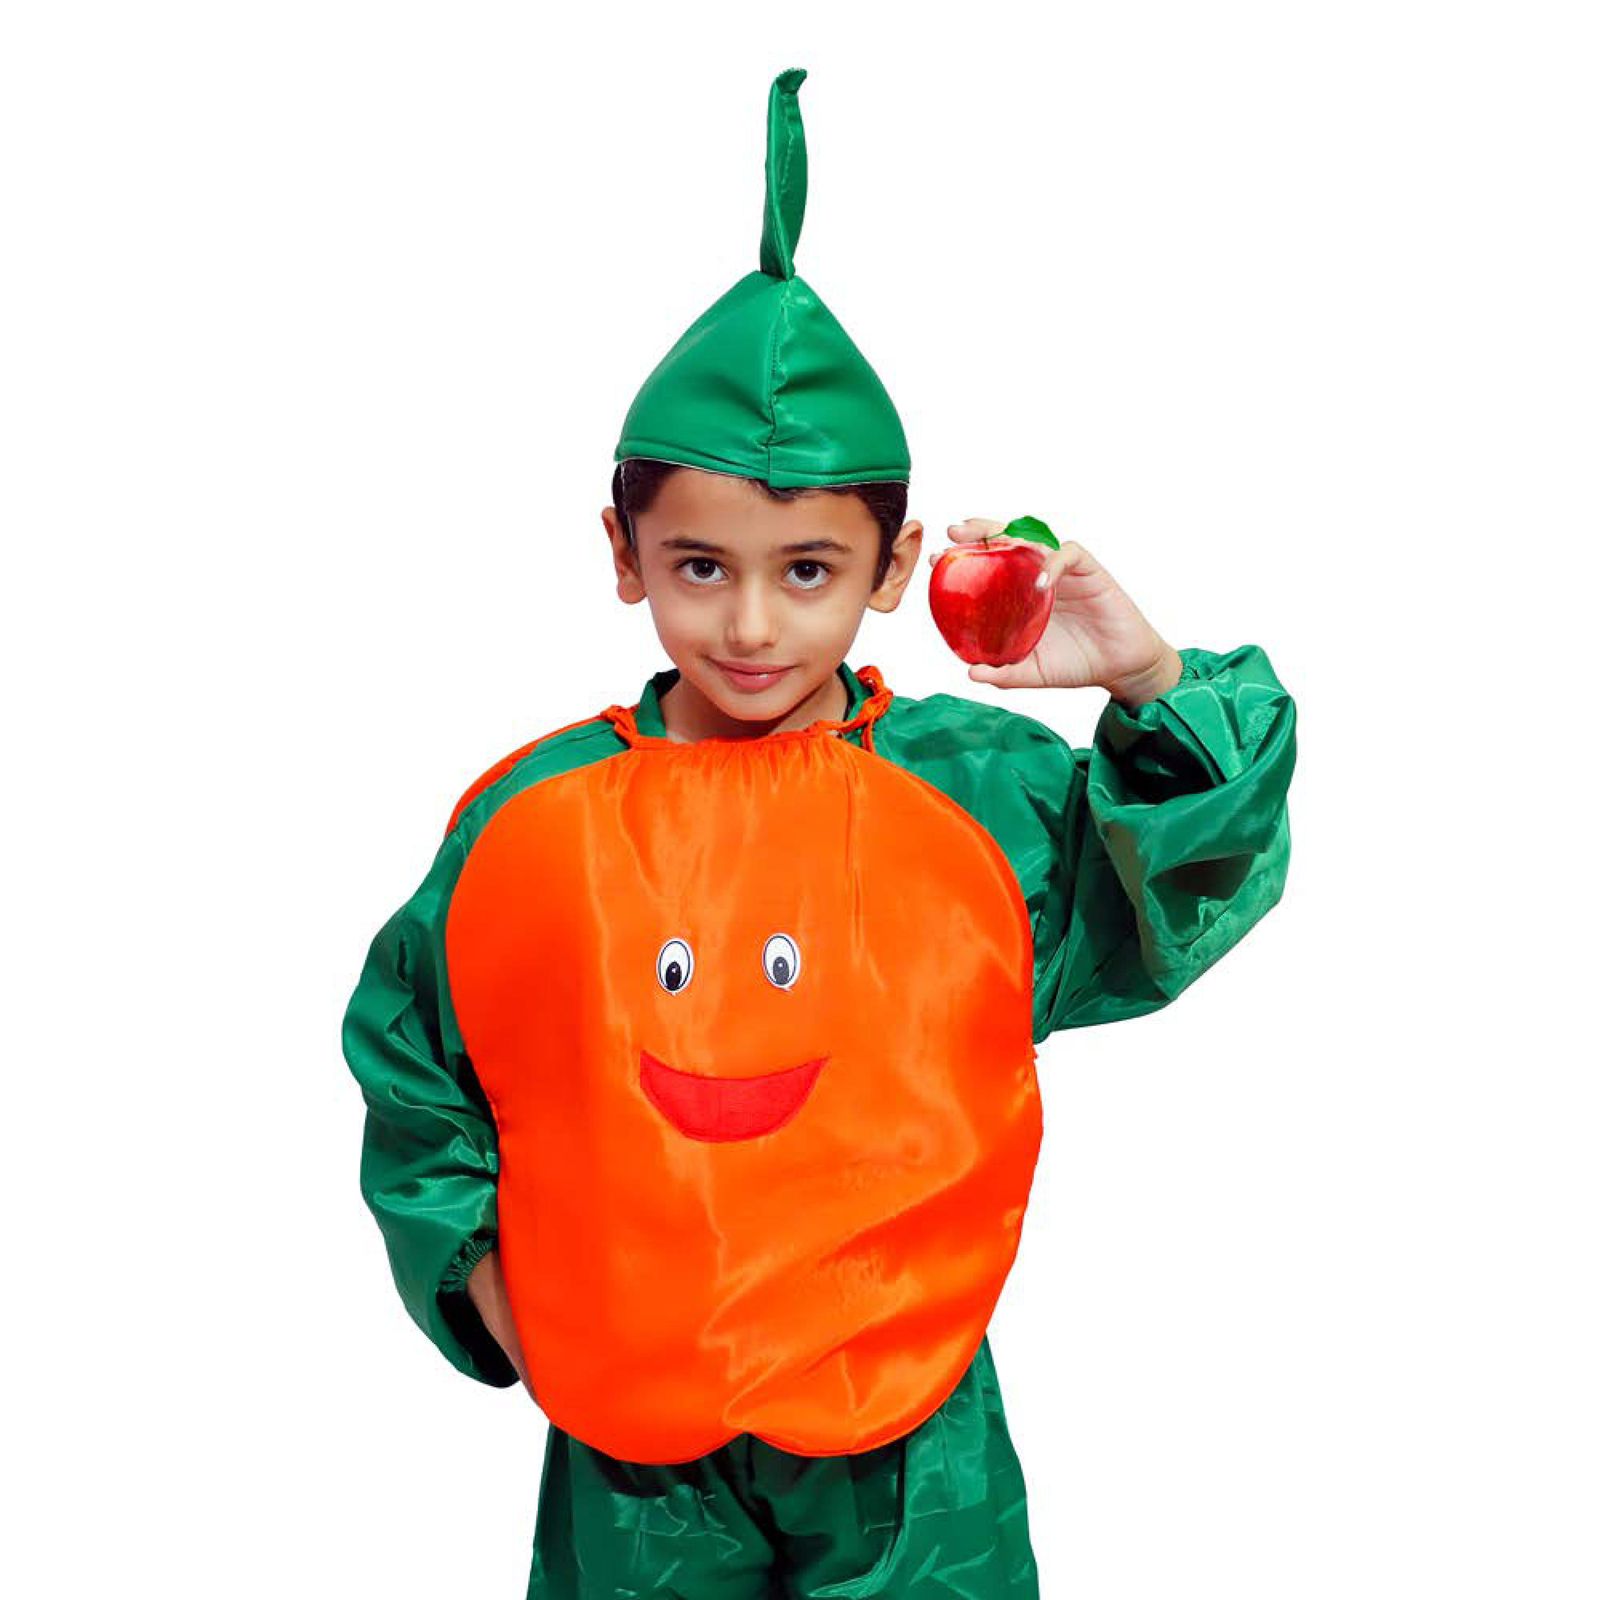 fruit fancy dress costume Archives - Welcome to Aaradhyafancy dresse